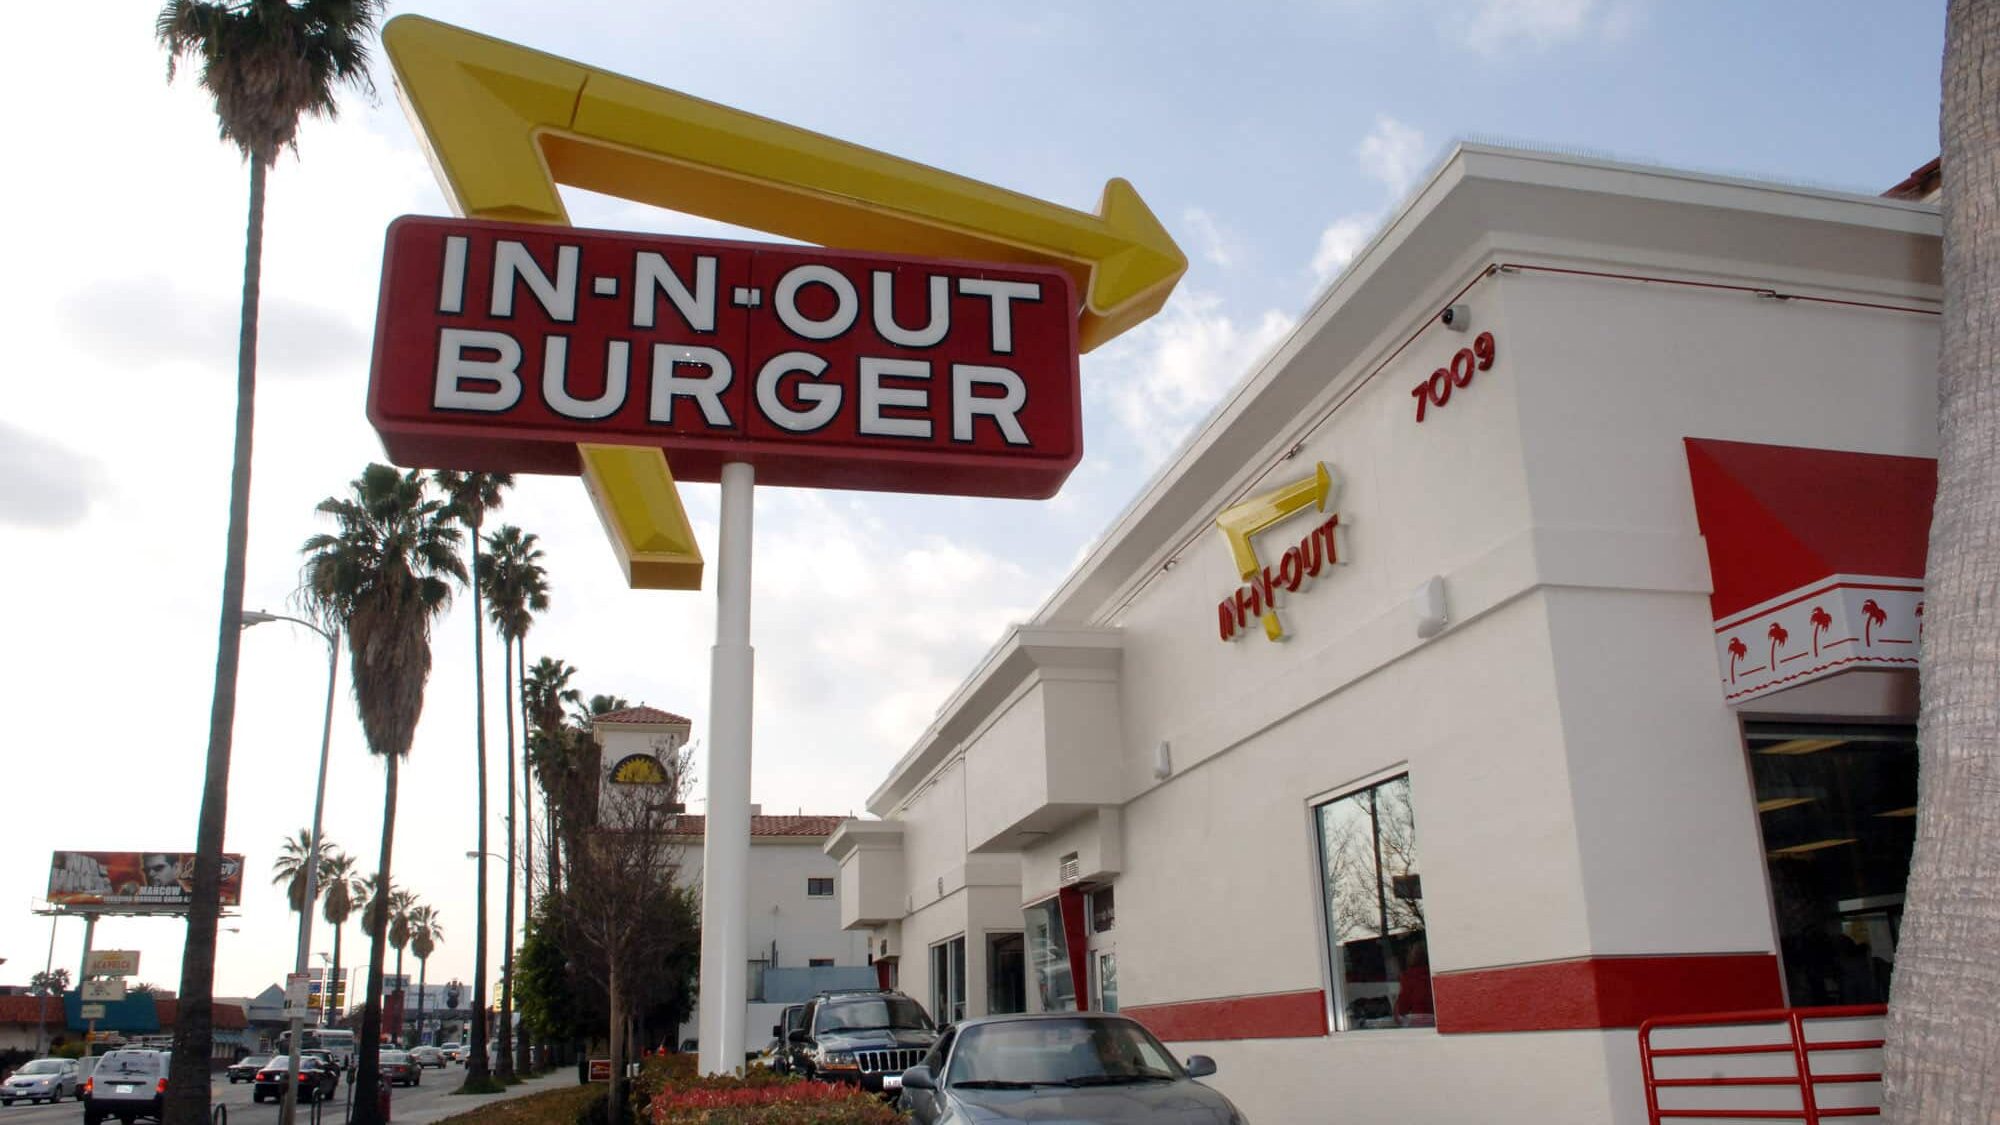 UNITED STATES - JANUARY 25: Drivers line up to pick up their orders from the drive through window at the In-N-Out Burger on Sunset Boulevard in the Hollywood area of Los Angeles, California, Wednesday, Jan. 25, 2006. Since Harry and Esther Snyder opened their first drive-through hamburger restaurant in Baldwin Hills, California, in in 1948, In-N-Out has become an institution, offering only burgers made from fresh meat and produce at its 202 locations and counting Hollywood celebrities such as Jennifer Garner and Angelina Jolie among its loyal clientele.